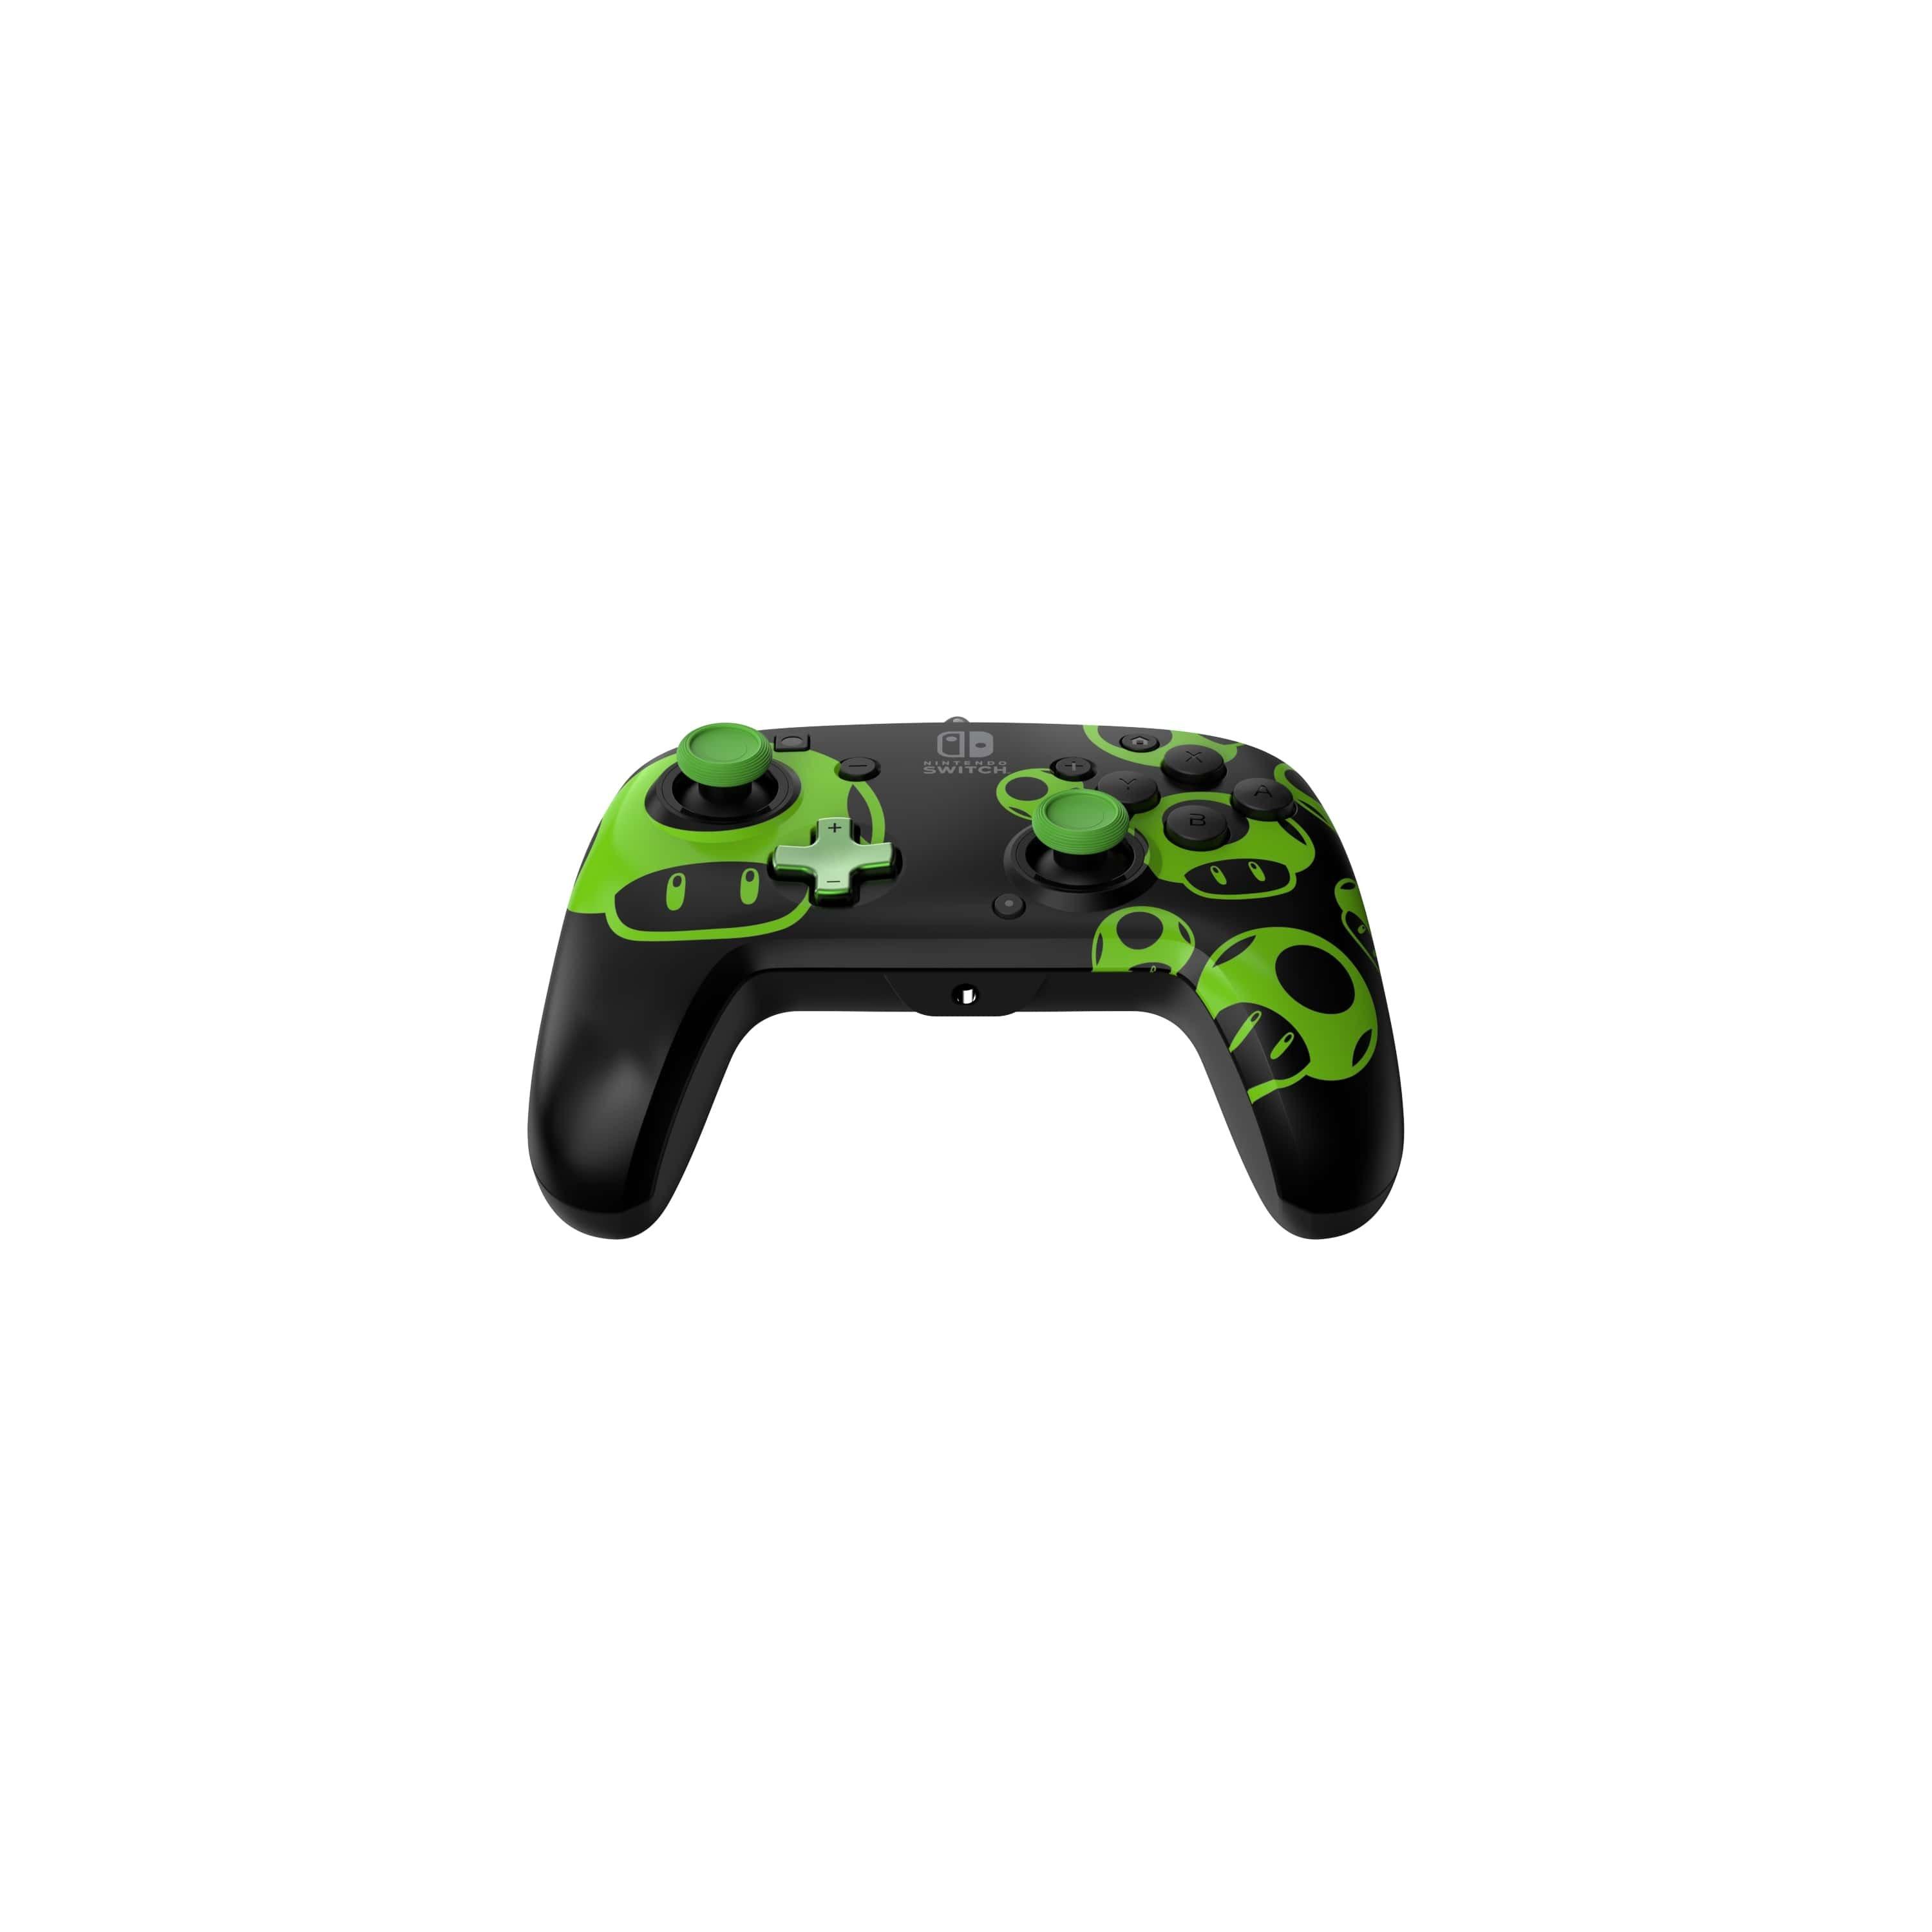 PDP Rematch Nintendo Switch Wired Pro Controller: Glow in the Dark